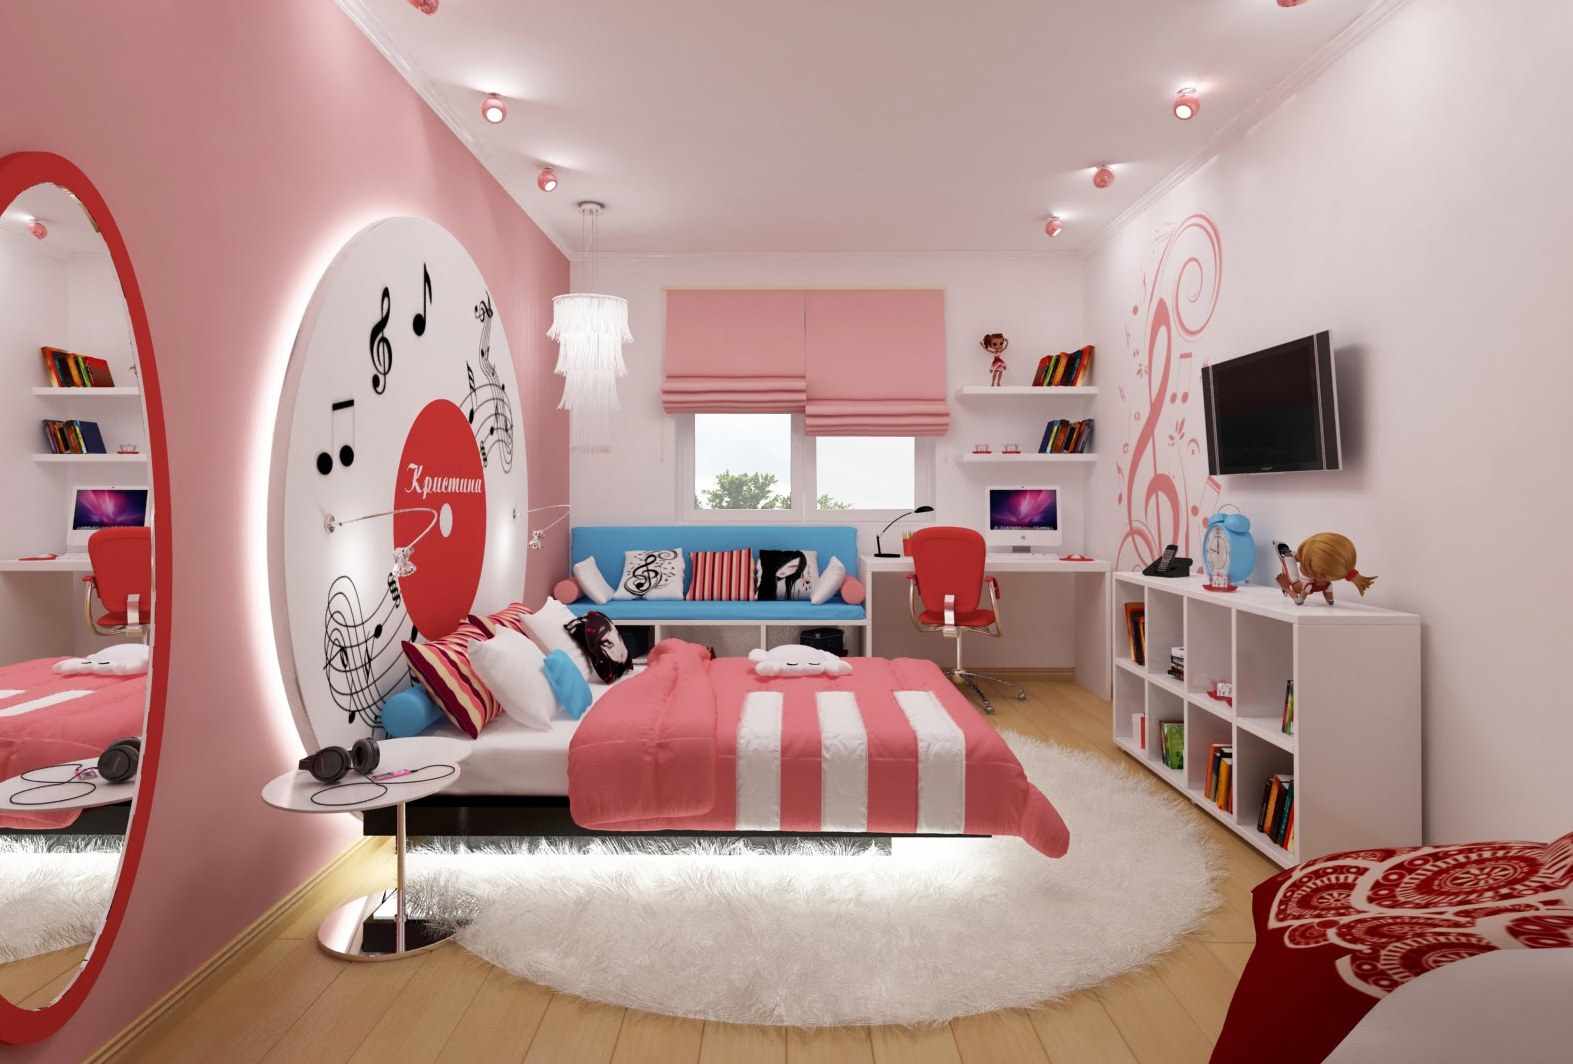 variant of the unusual design of a nursery for a girl